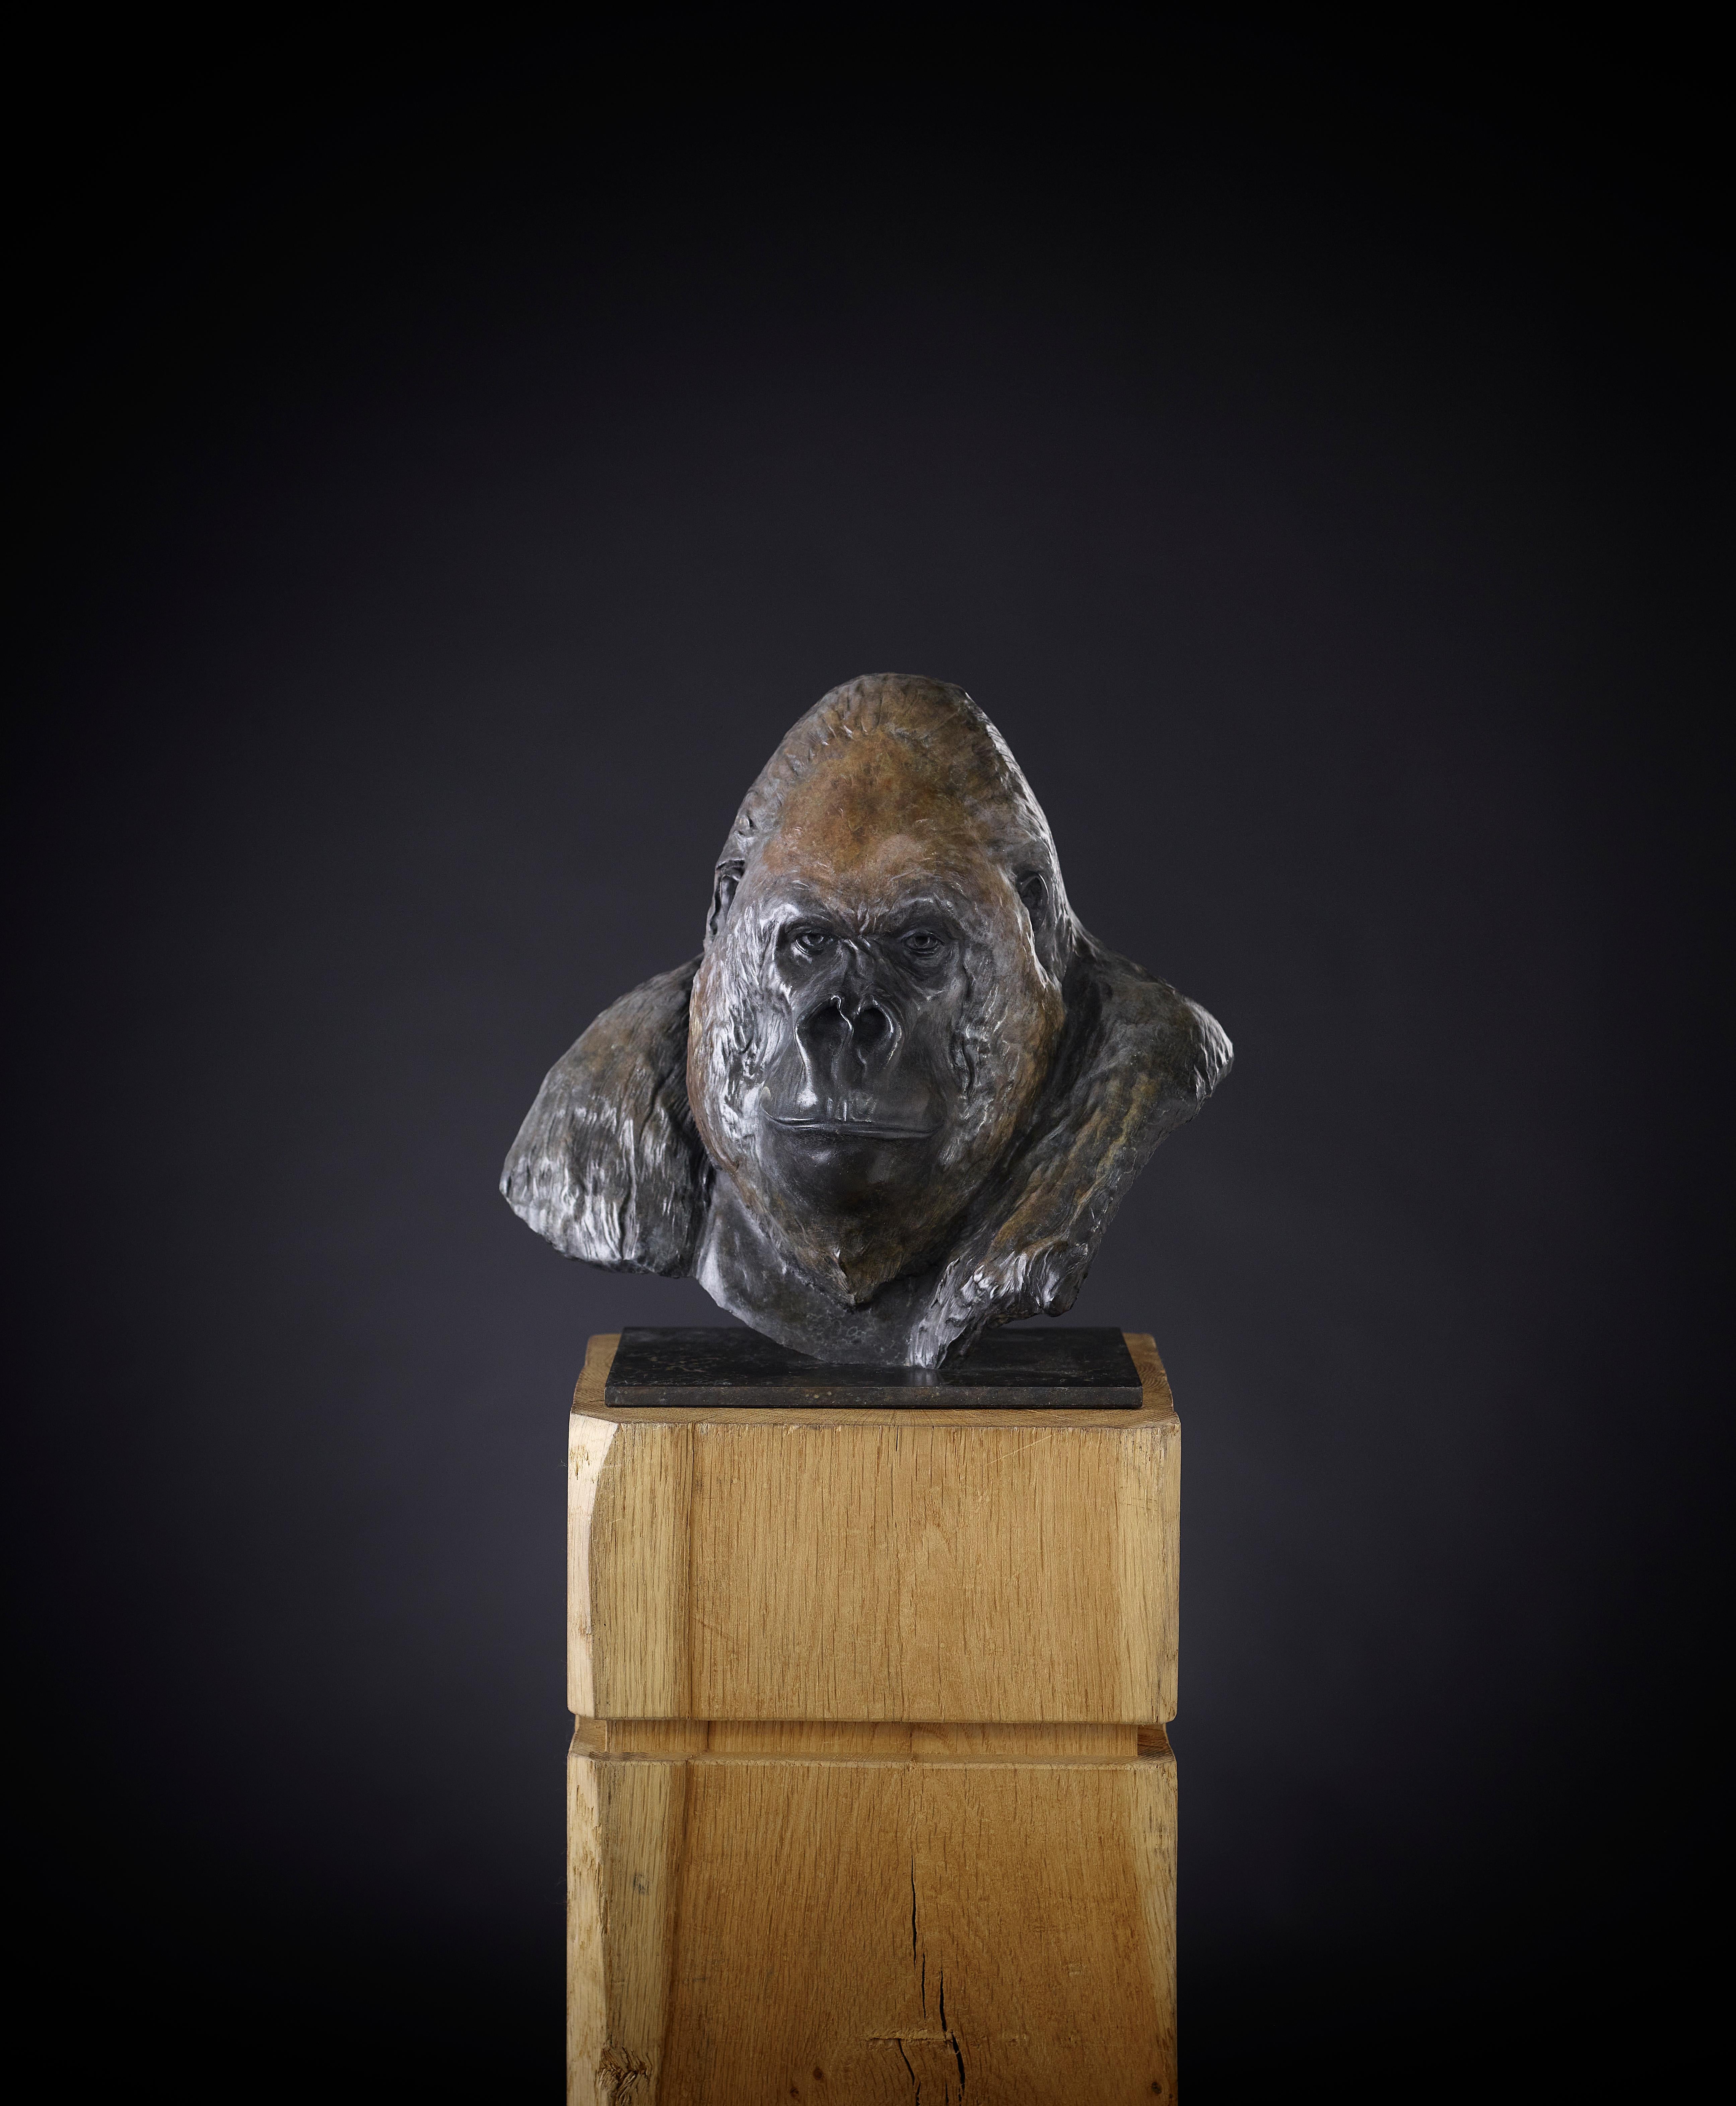 'Nico Jnr' by Tobias Martin is a Solid Bronze Animal Sculpture. Based on the famous Gorilla 'Nico' who was the largest and oldest Silverback Gorilla kept in captivity. 

Tobias Martin was born in 1972 in Wiltshire, 12 miles from Stonehenge.